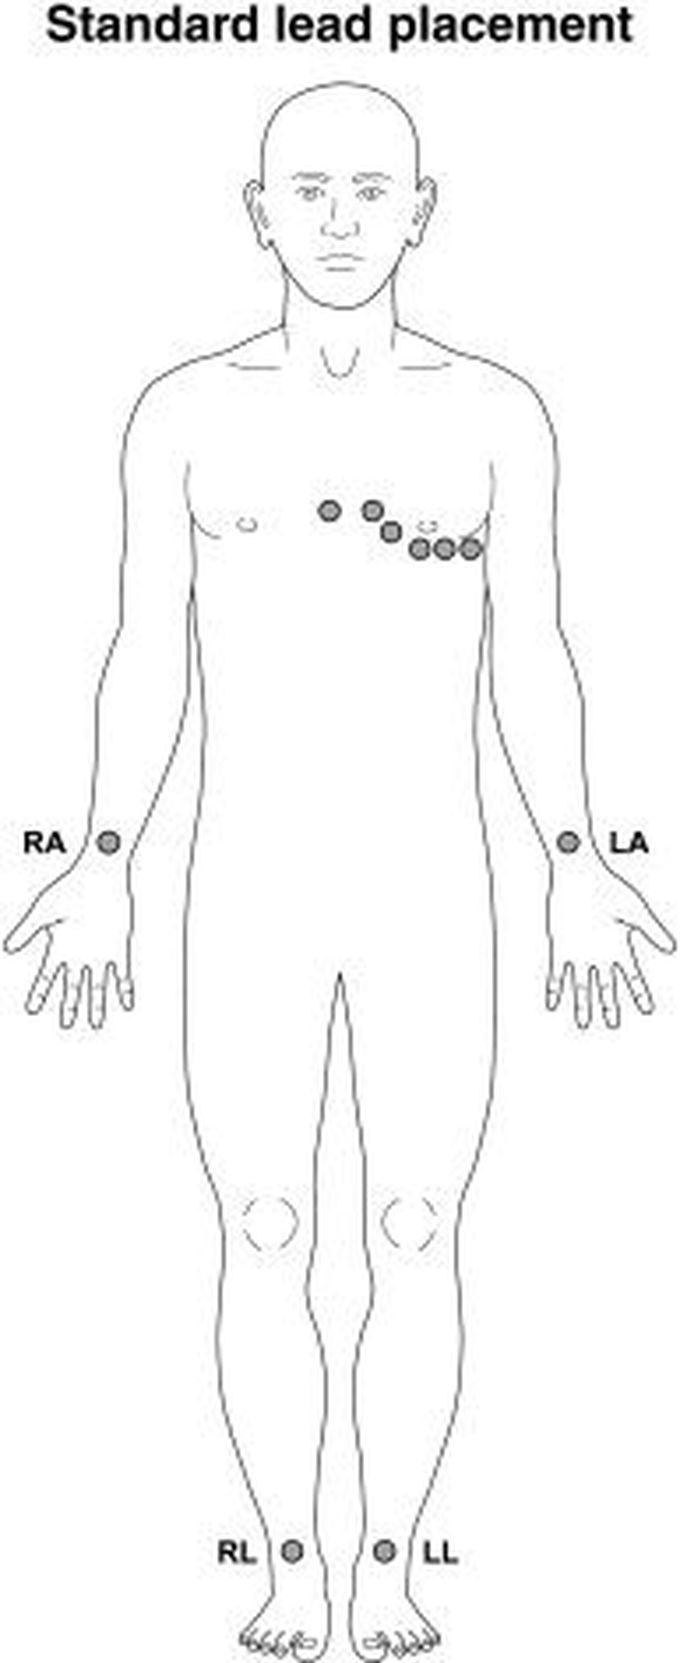 ECG lead placement